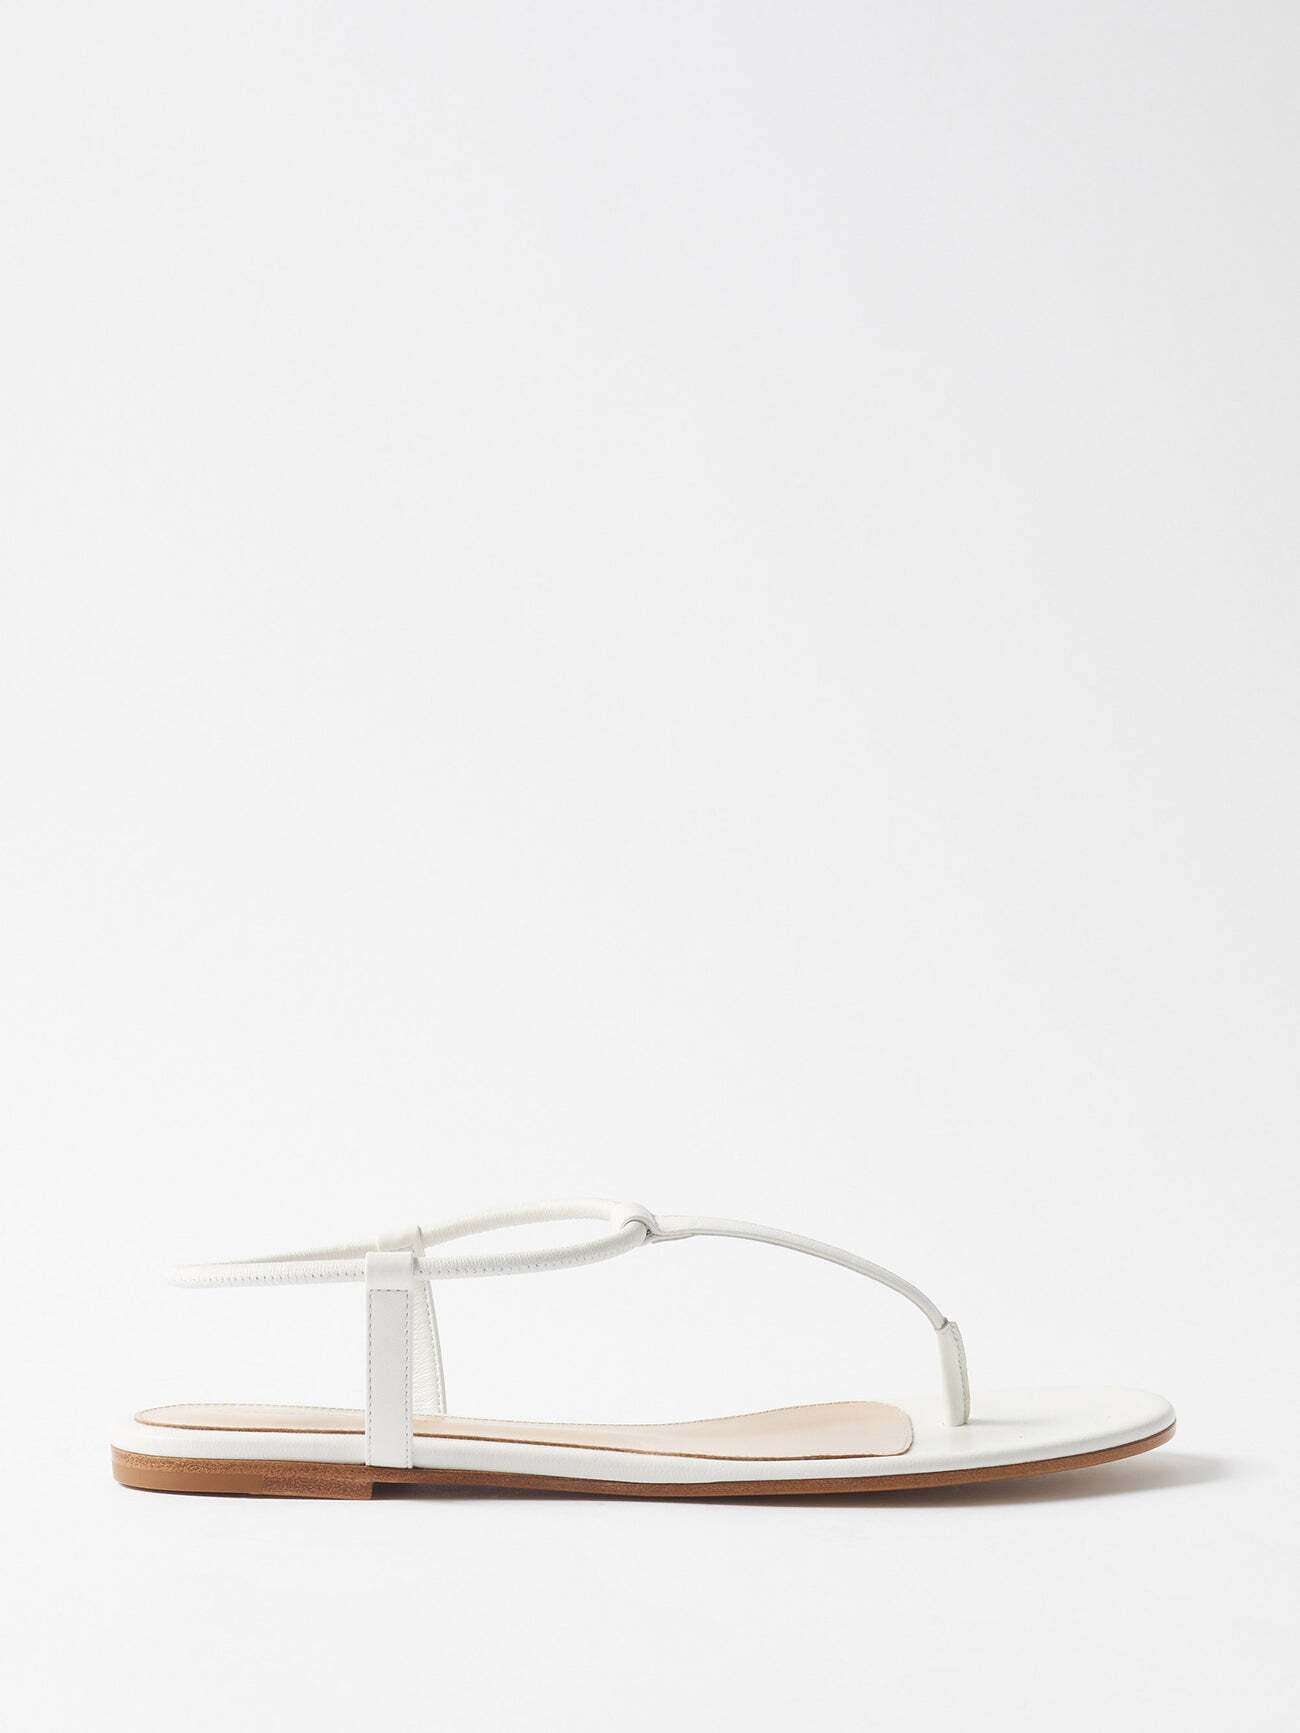 Gianvito Rossi - Jaey Leather Sandals - Womens - White